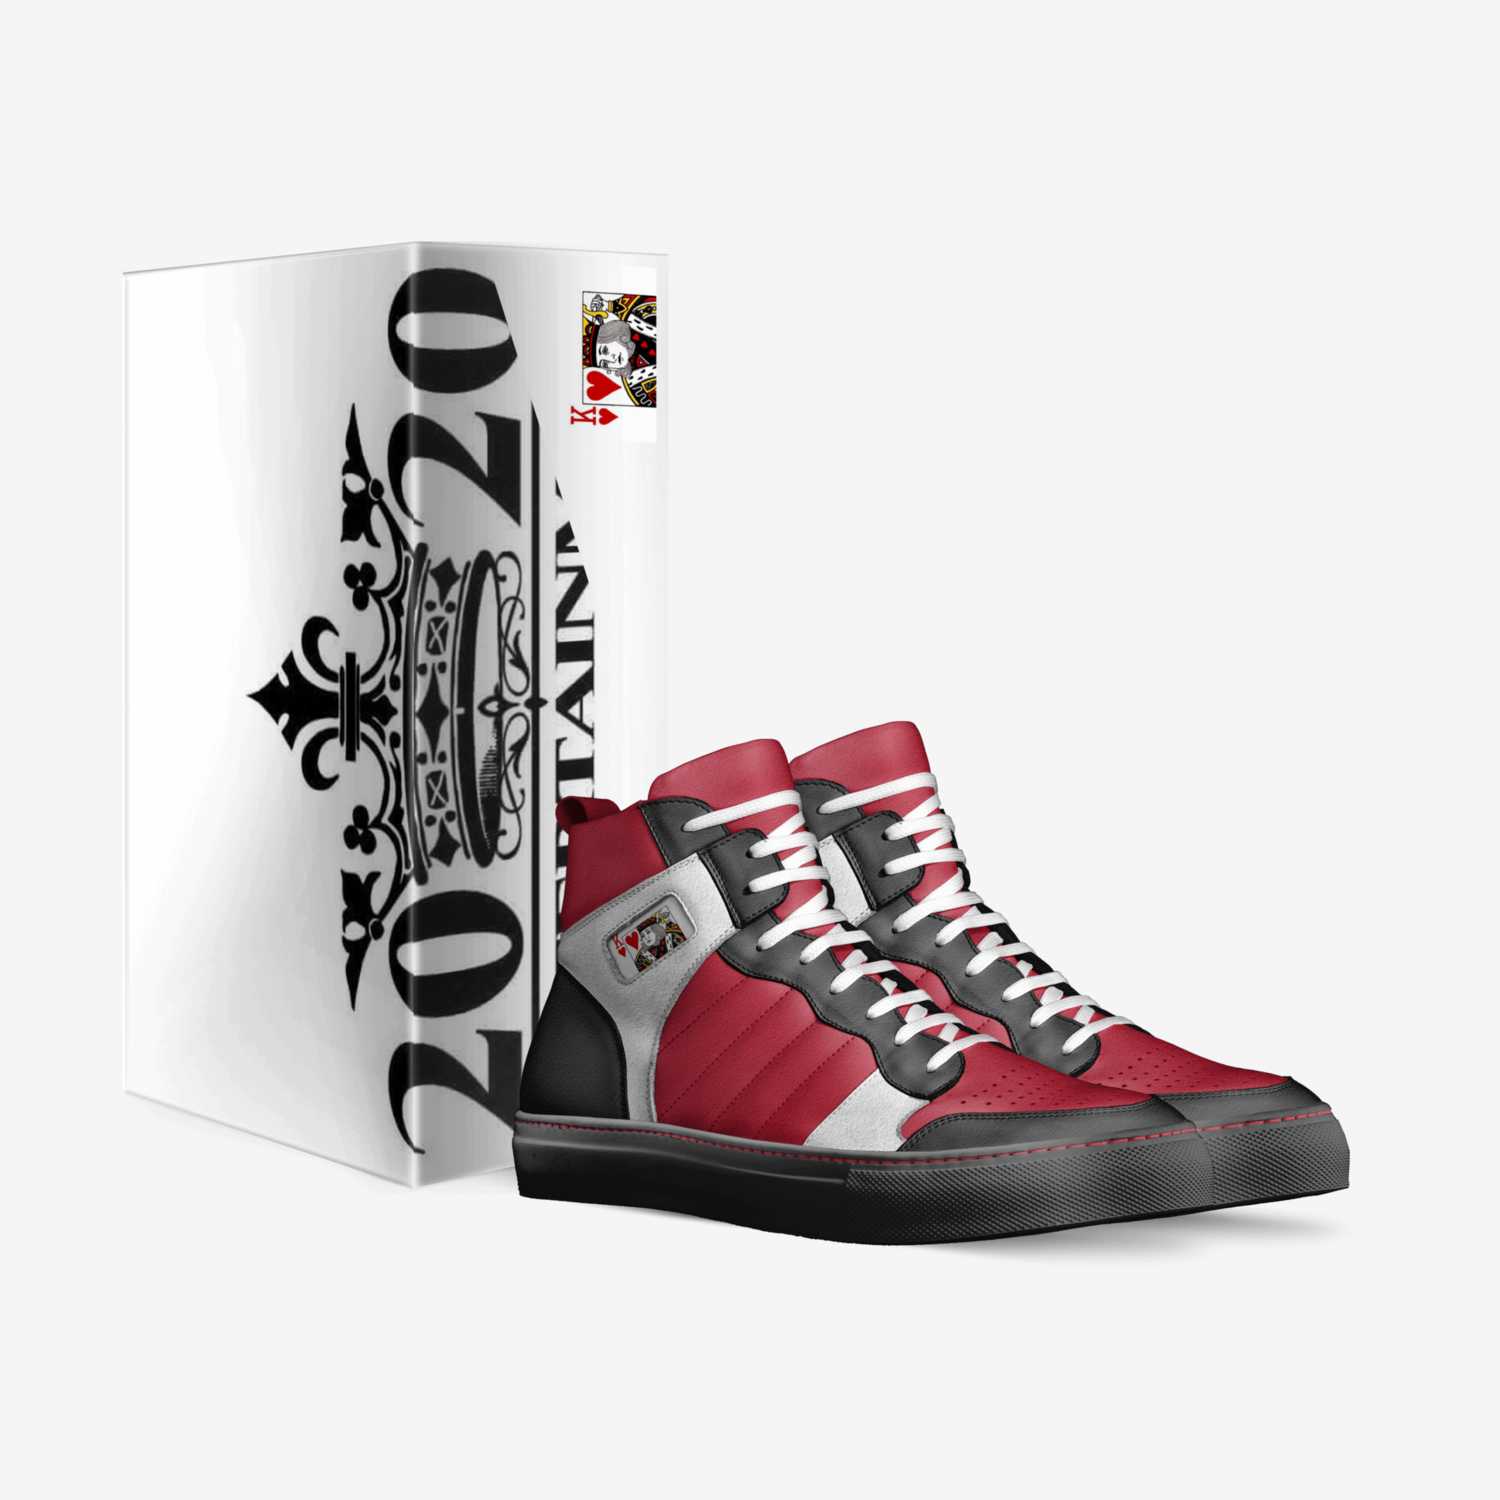 2020 SK's custom made in Italy shoes by Tamesubliminal Collins | Box view